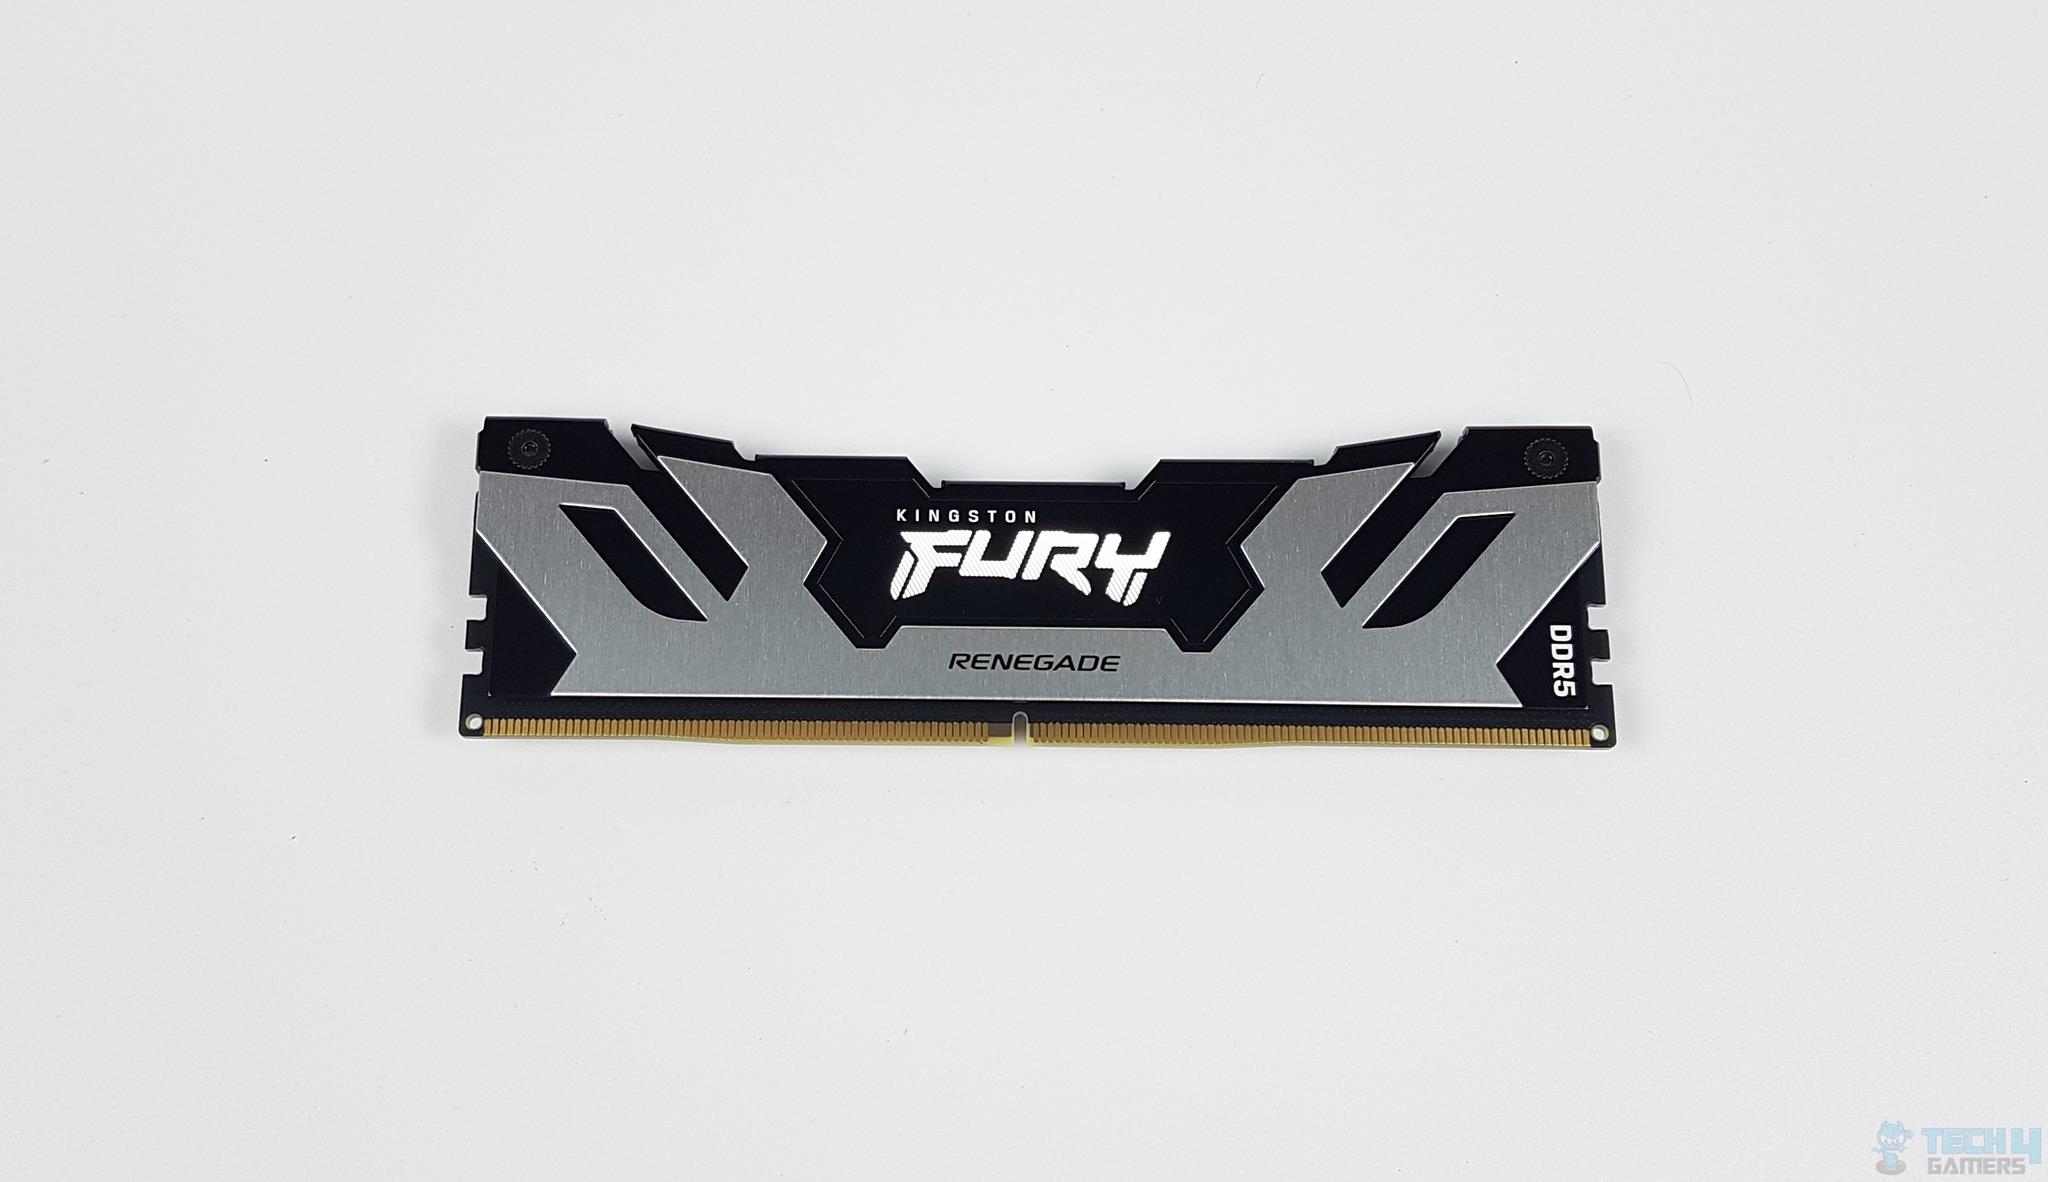 Kingston Fury Renegade 6400MT/s CL32 32GB DDR5 Kit — The RAM in all its glory